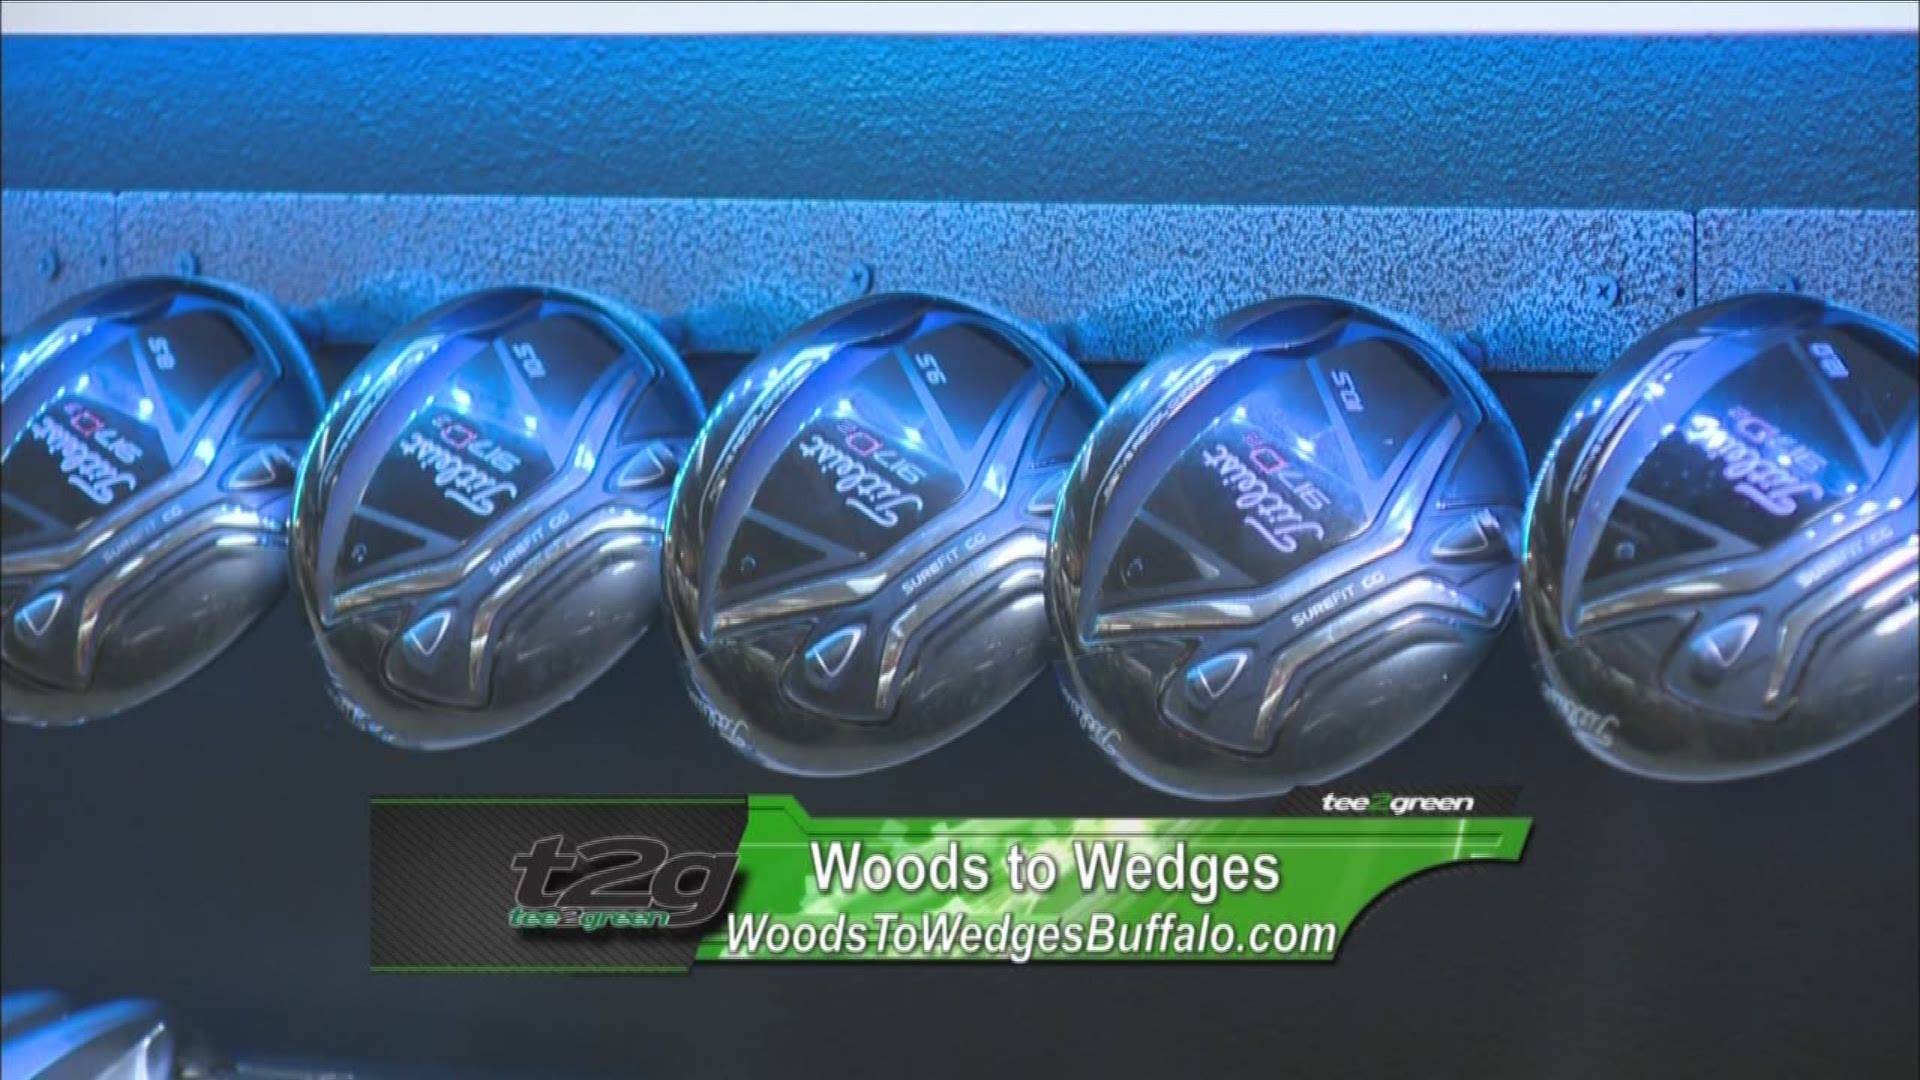 Kevin Sylvester is at Woods to Wedges with Kevin Hoffstetter and David Patronik to discuss how their cutting edge technology can make your golf game better.